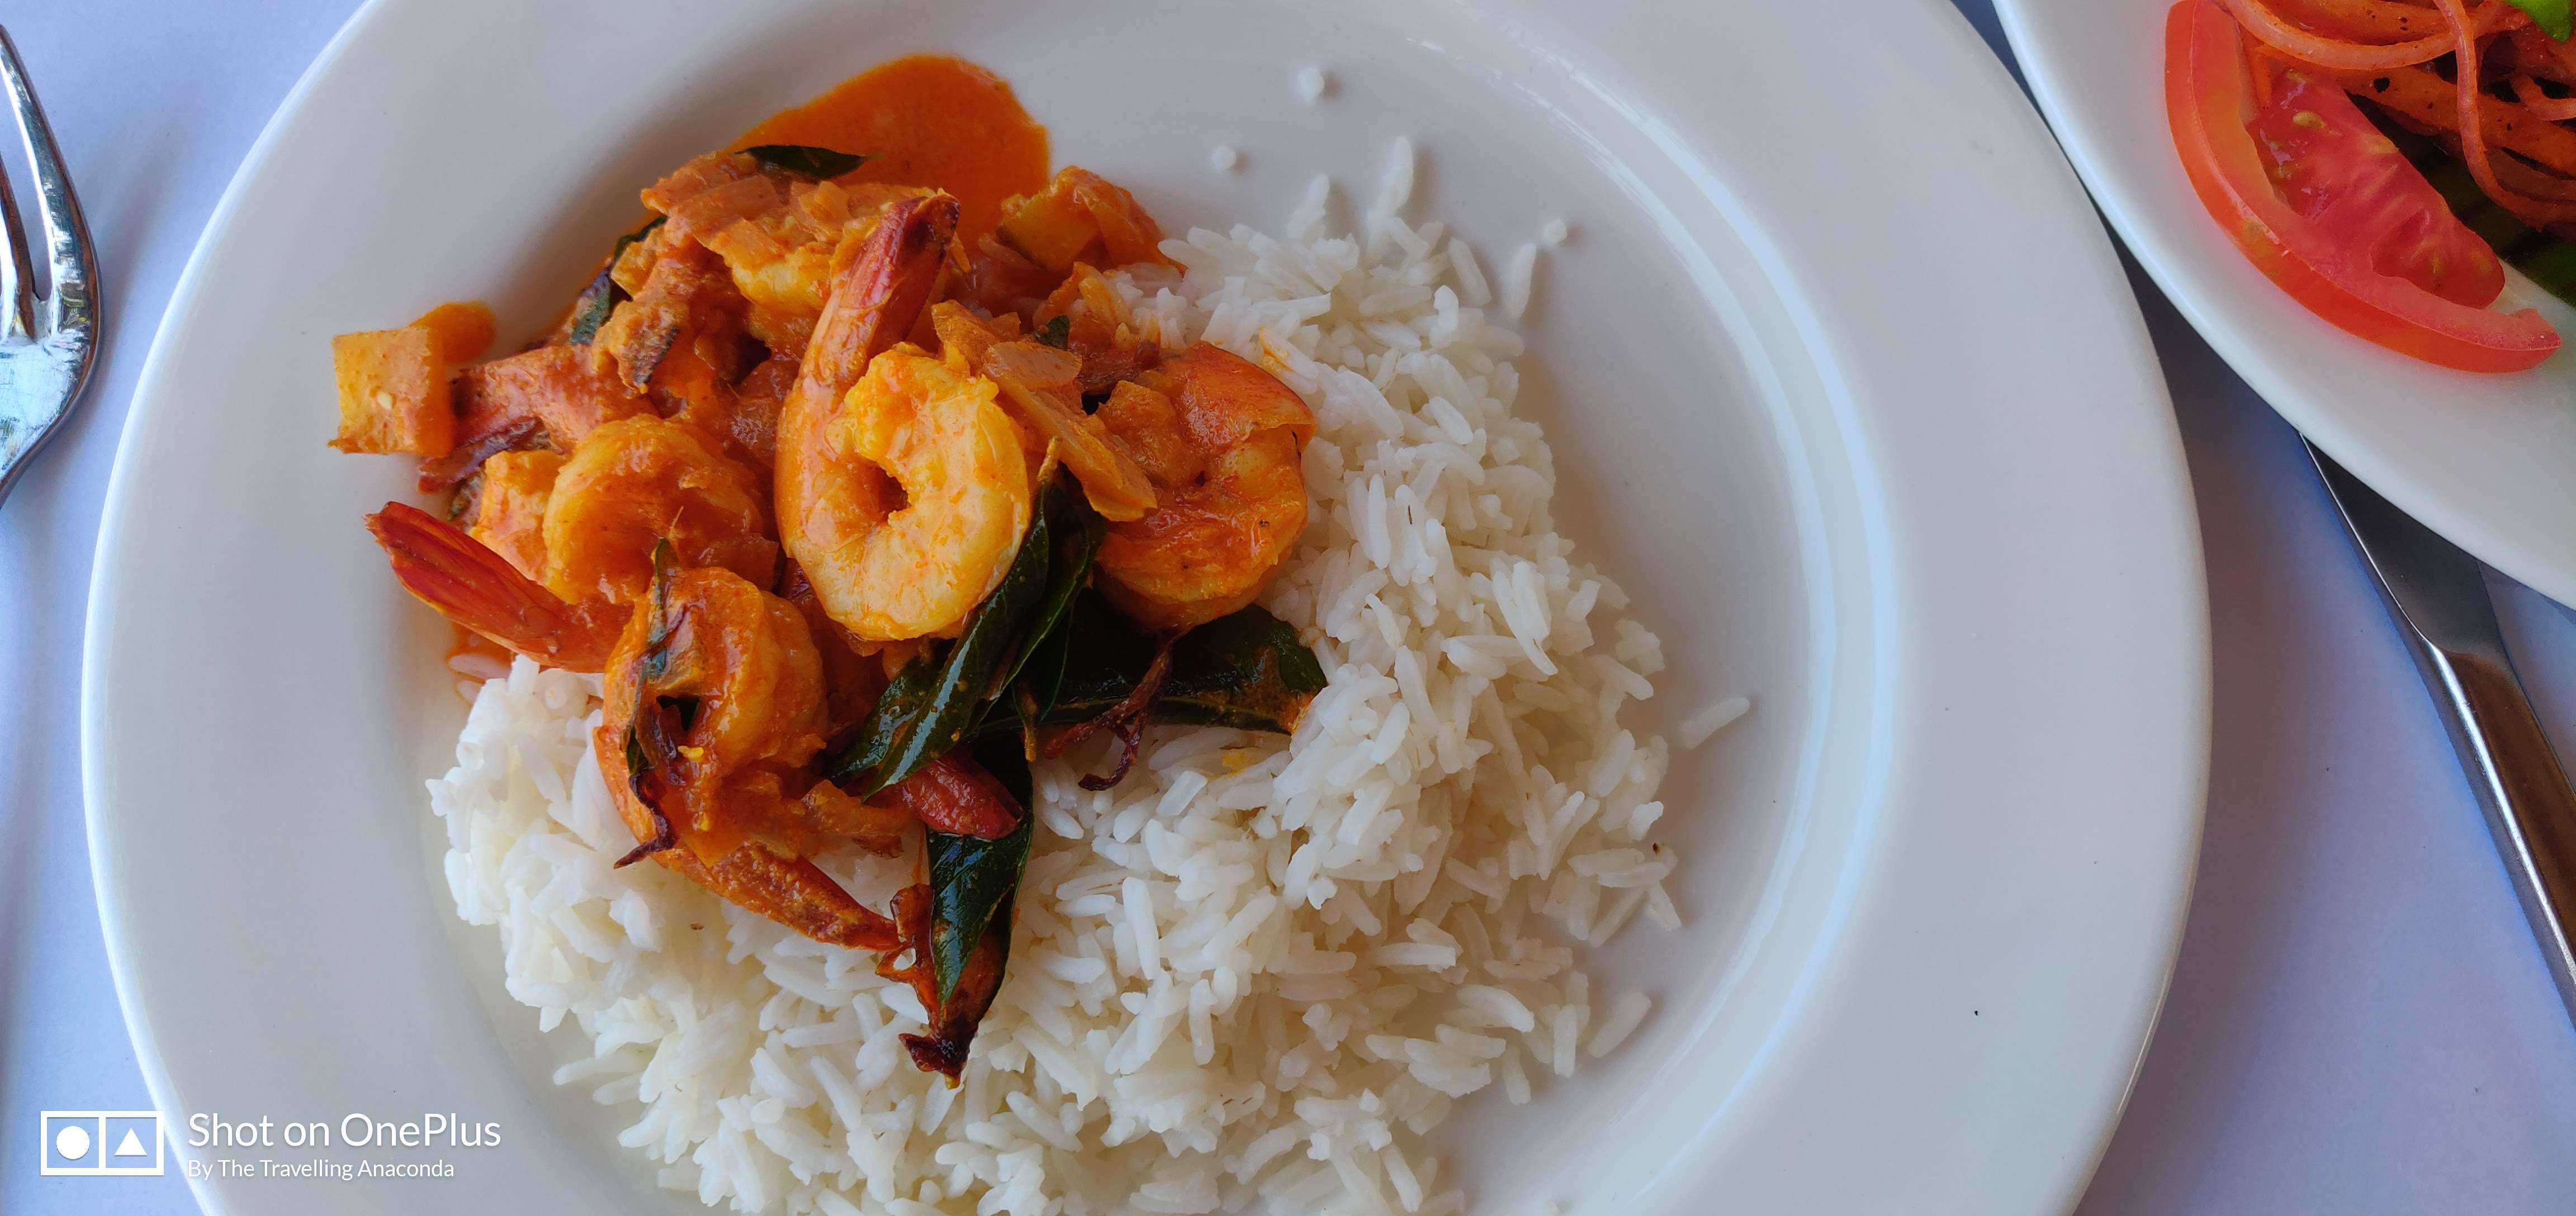 Eat a delicious plate of Prawn mango curry at Fort Kochi